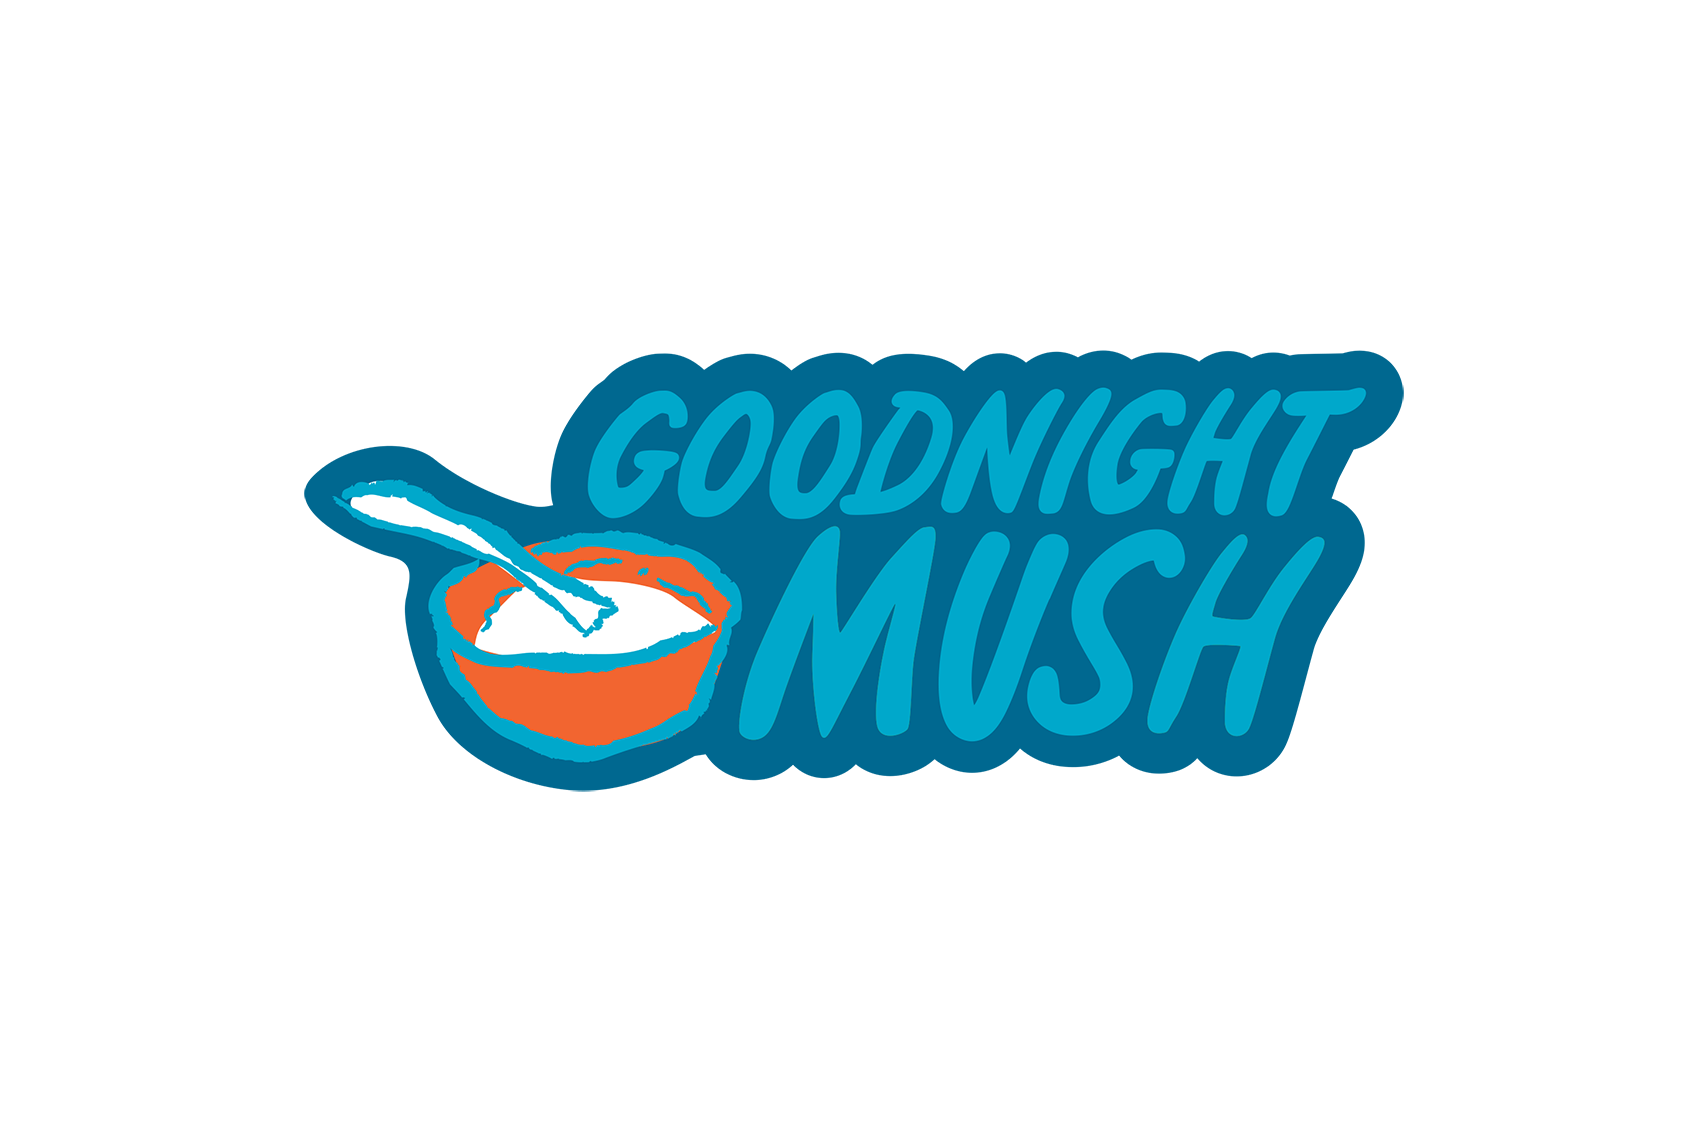 Pages-from-GoodnightMoon_7_29_10-3.png